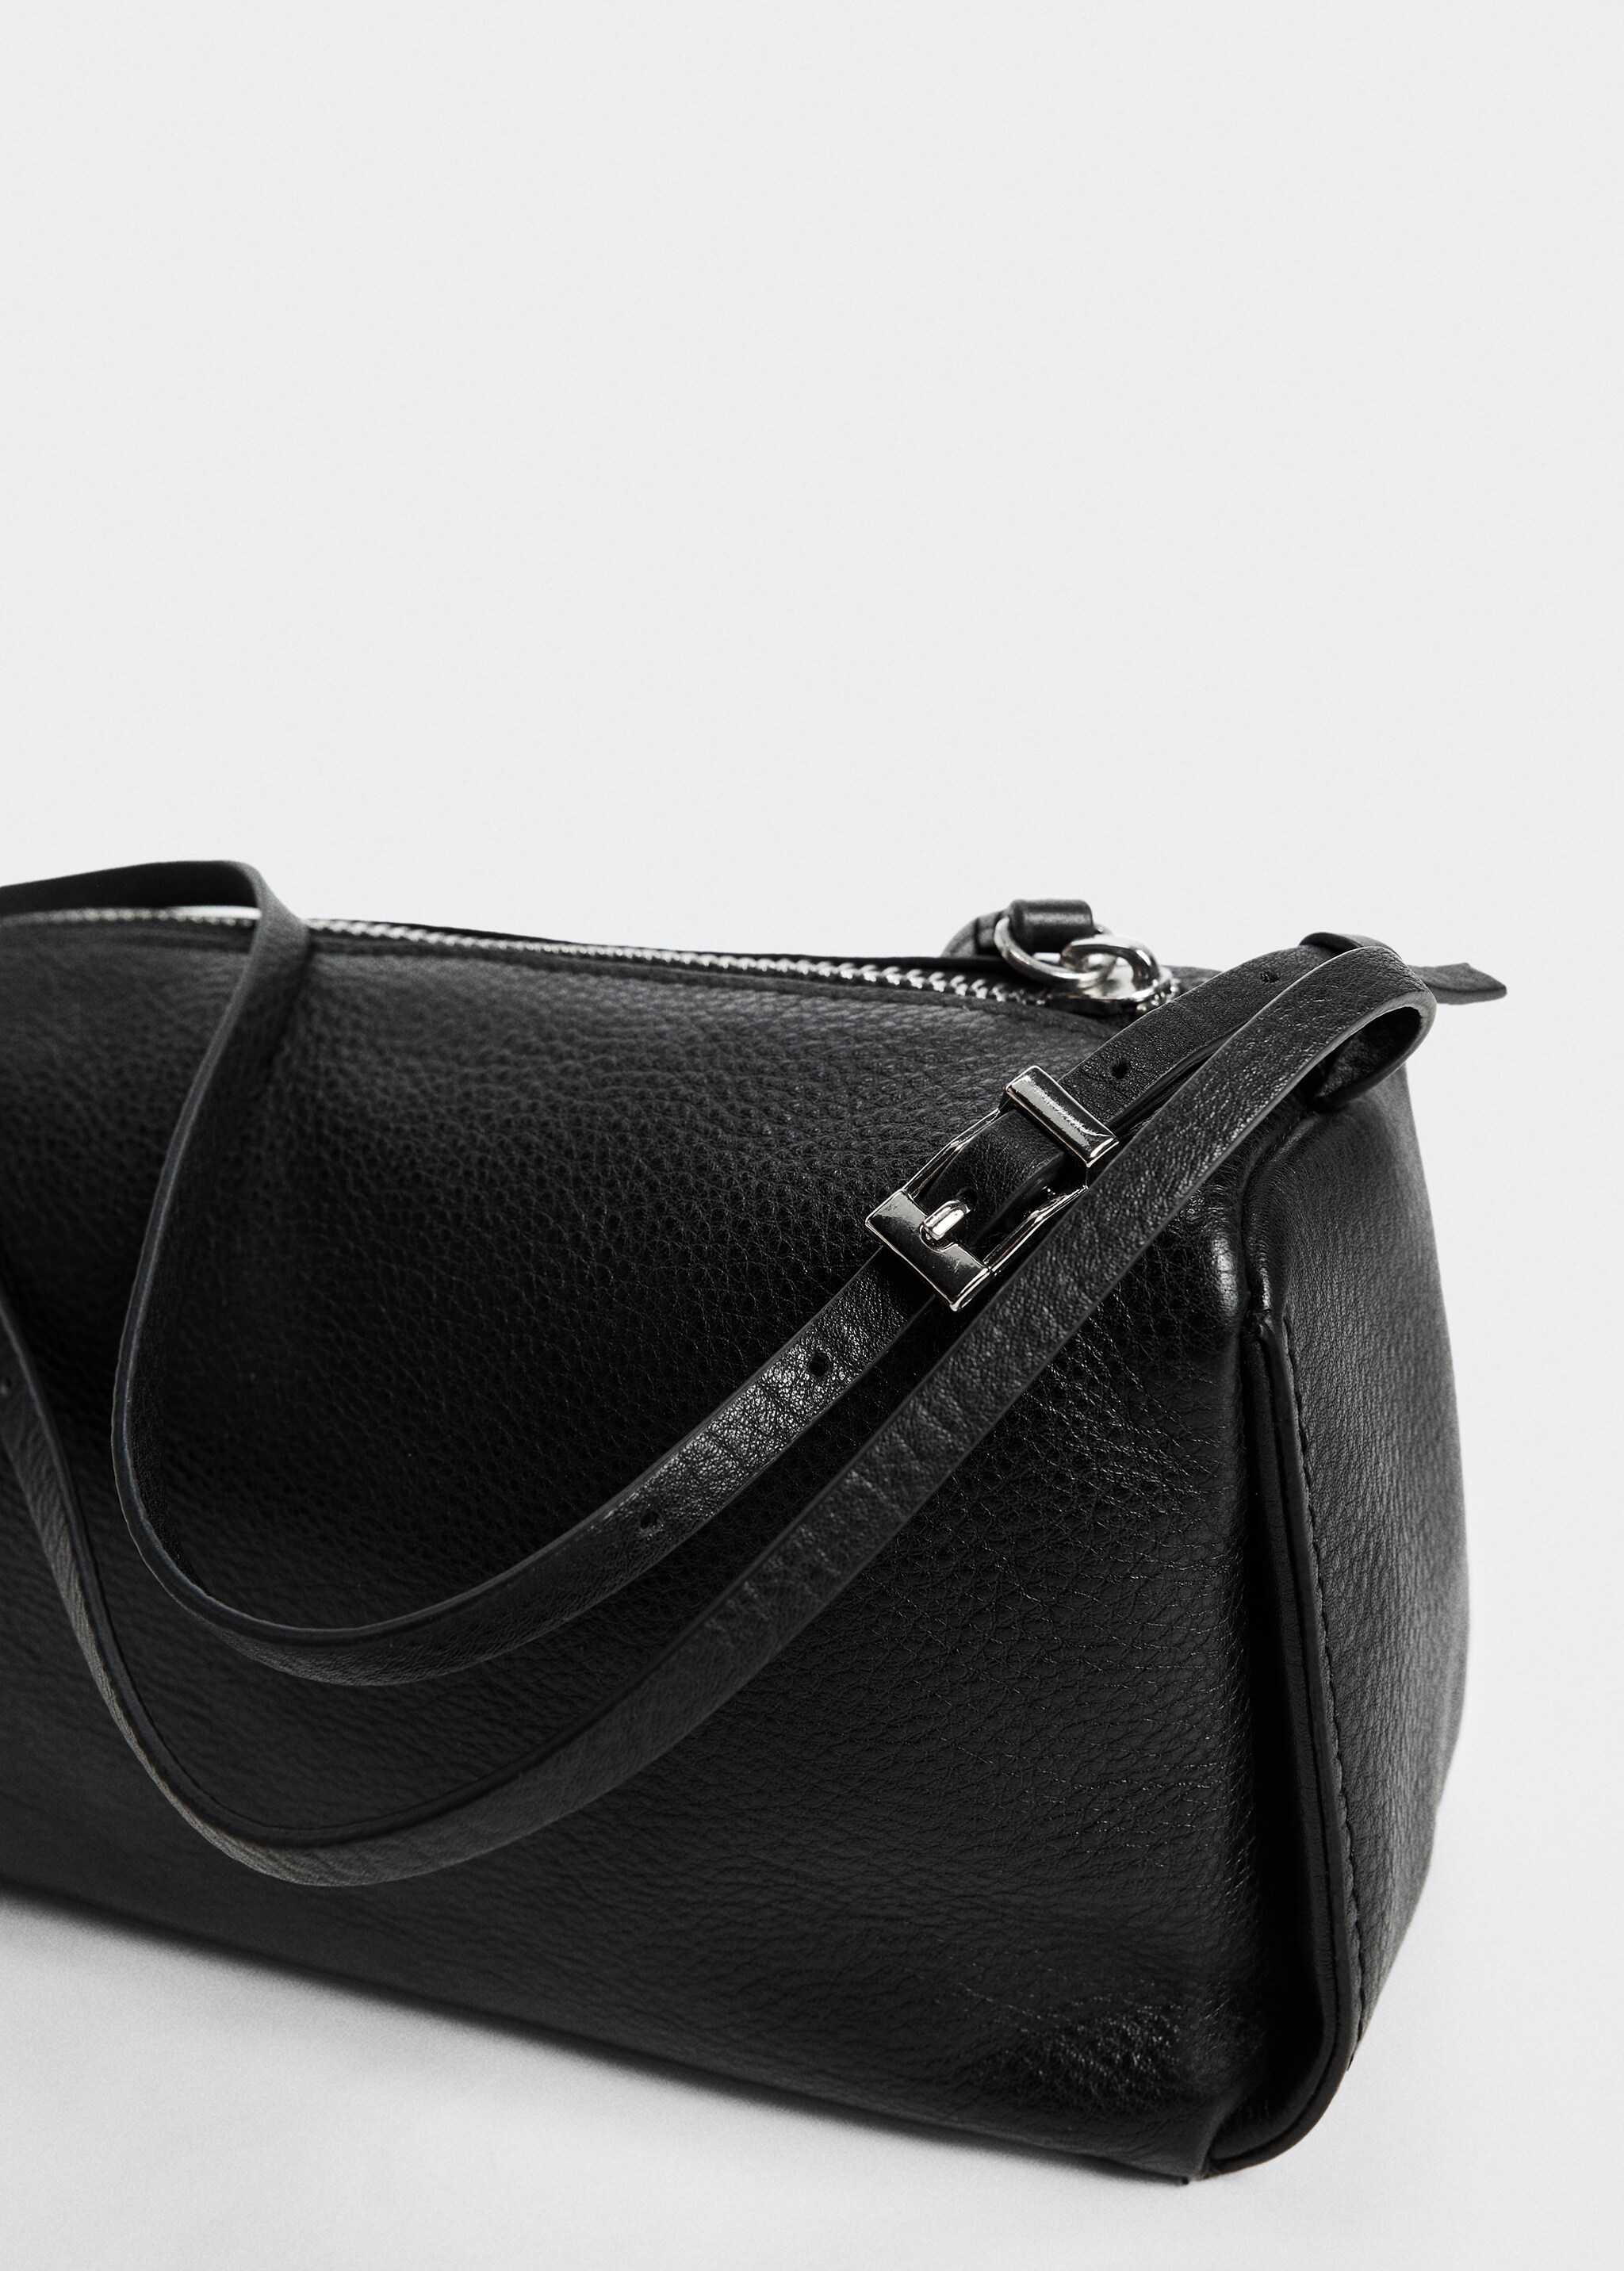 Small leather bag - Details of the article 1